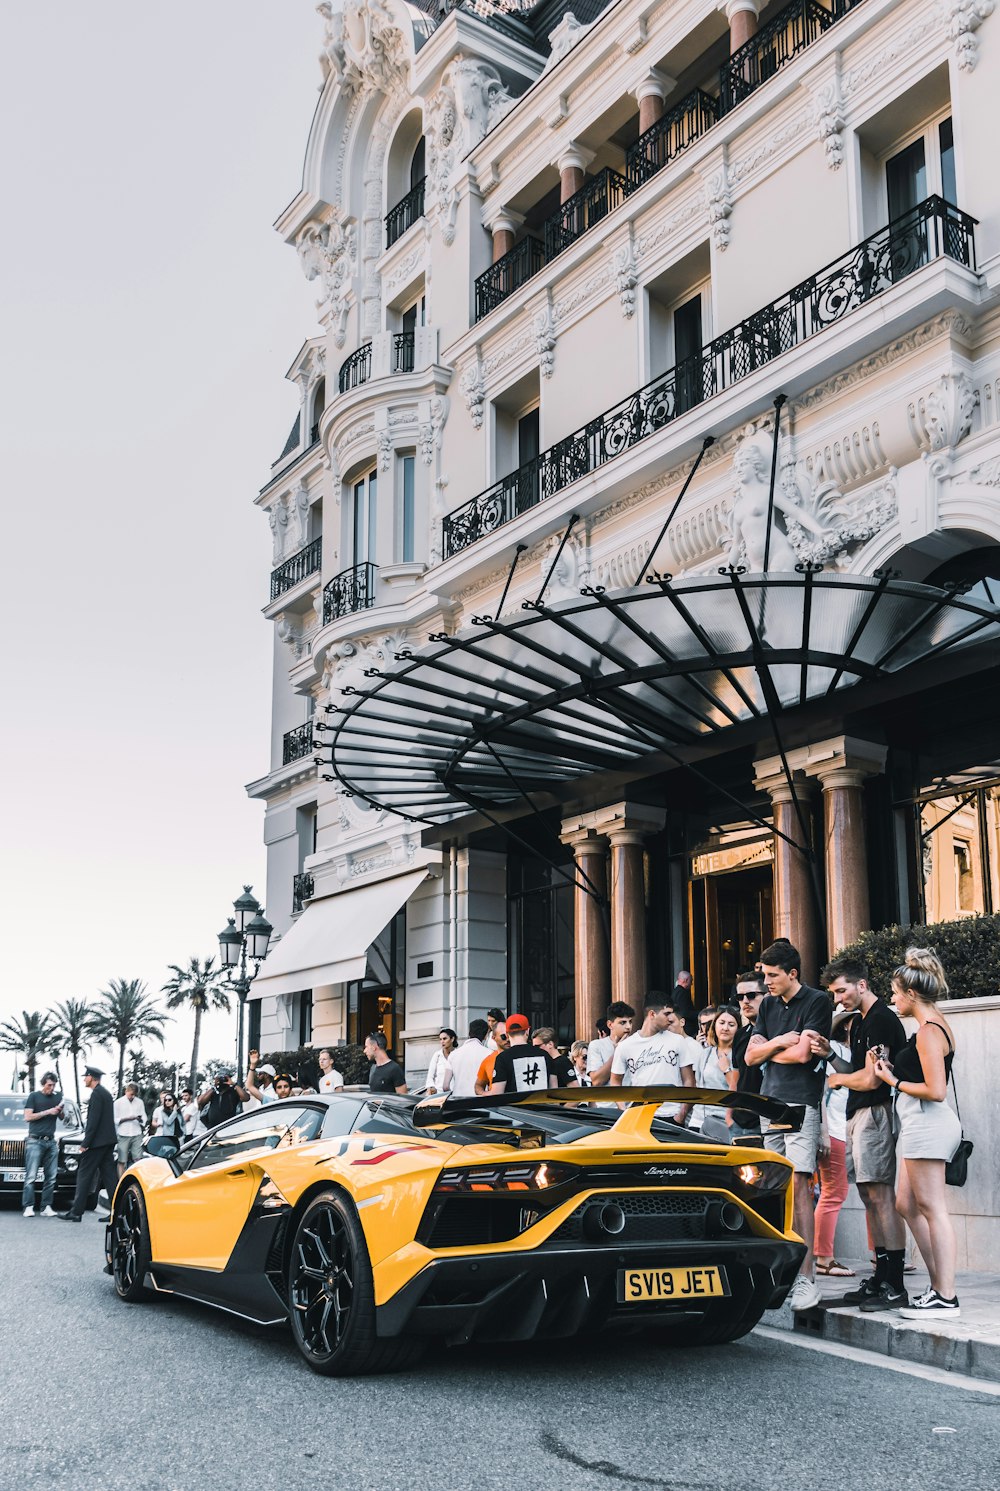 1000+ Luxury Lifestyle Pictures | Download Free Images on Unsplash